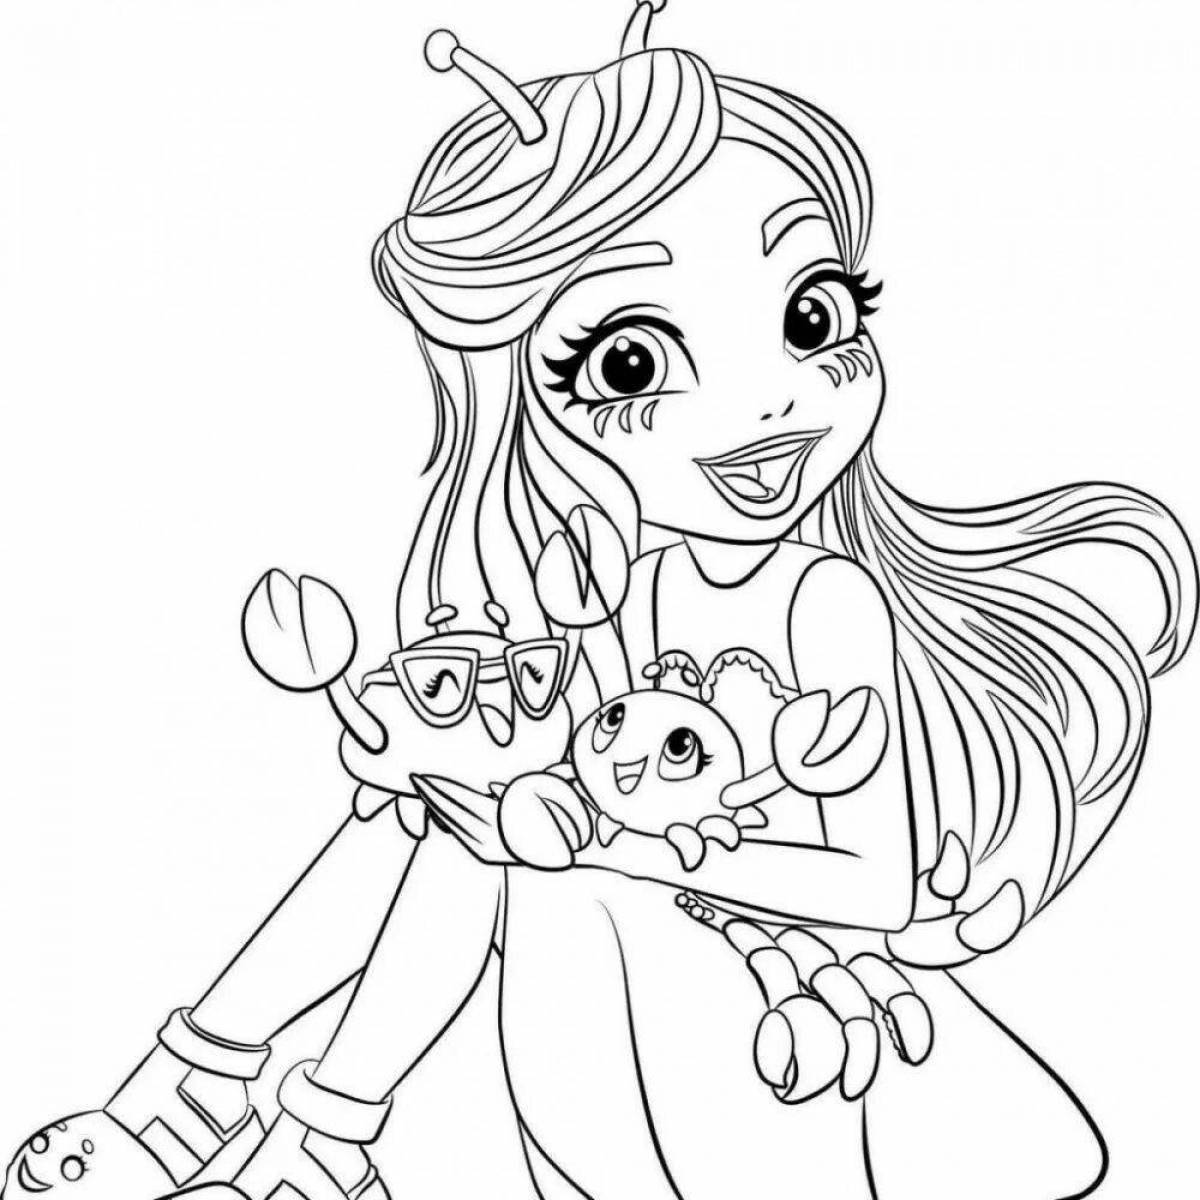 Animated mermaid coloring page